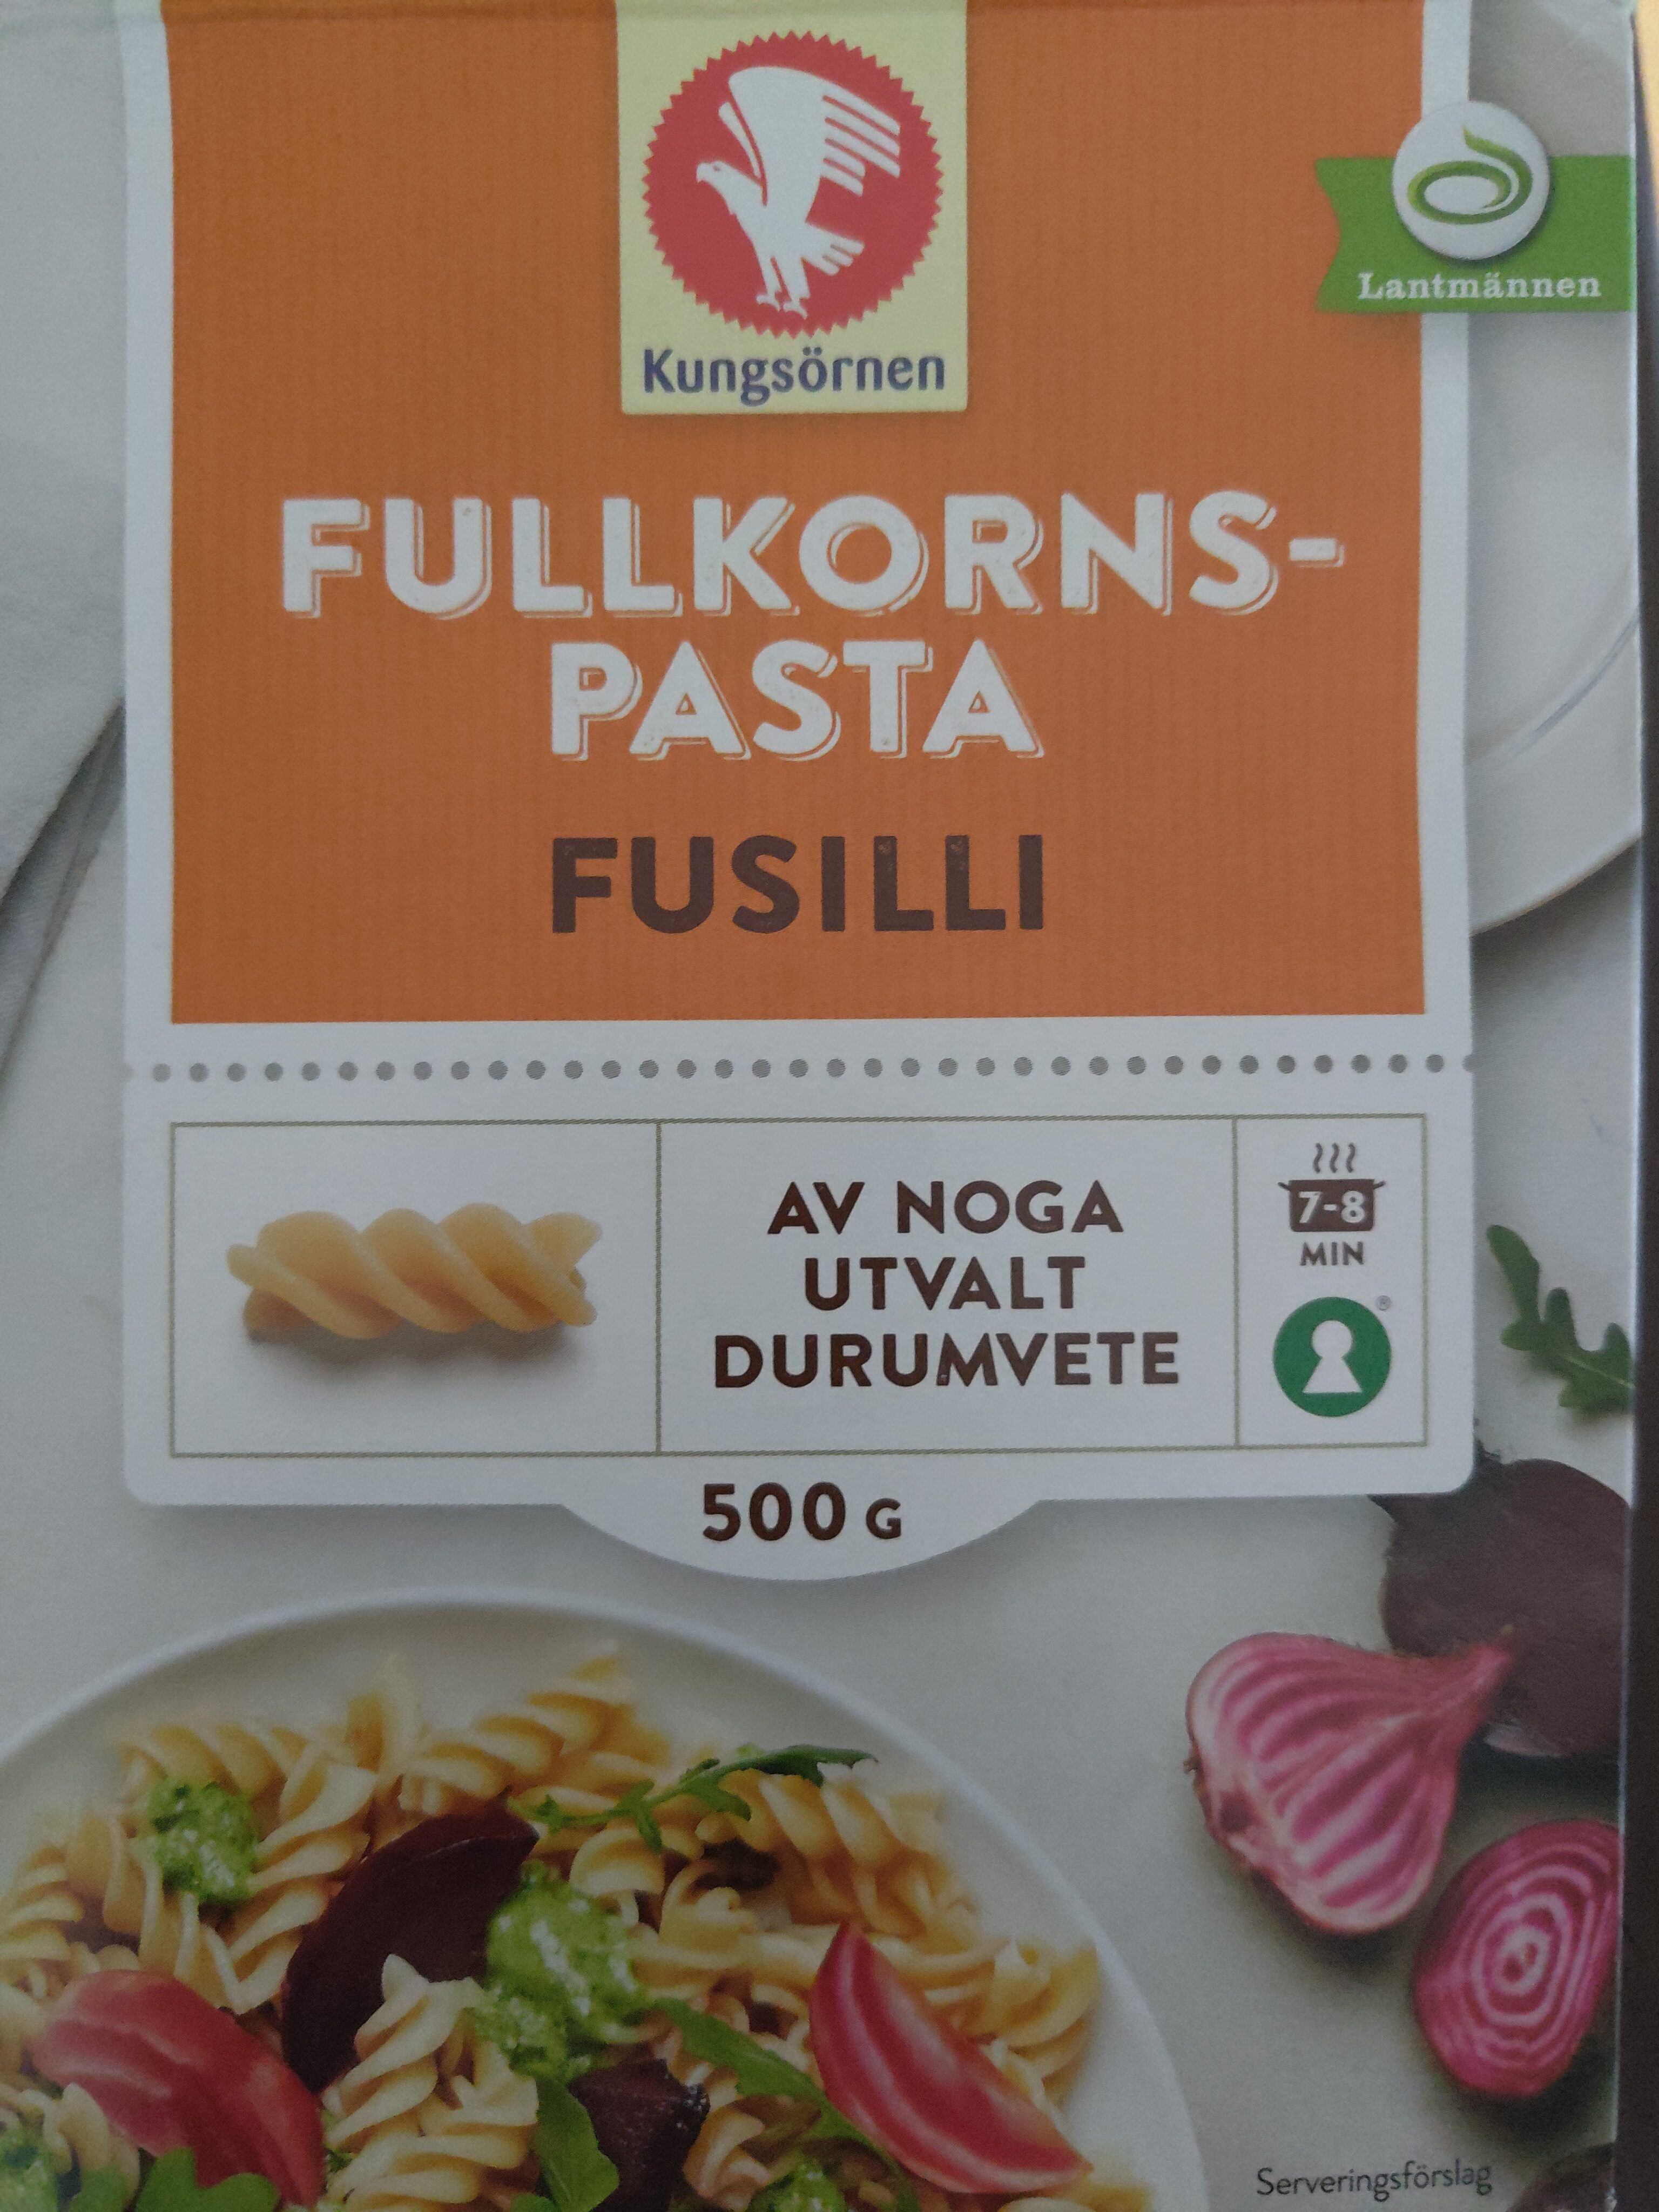 Fullkornspasta Fusilli - Recycling instructions and/or packaging information